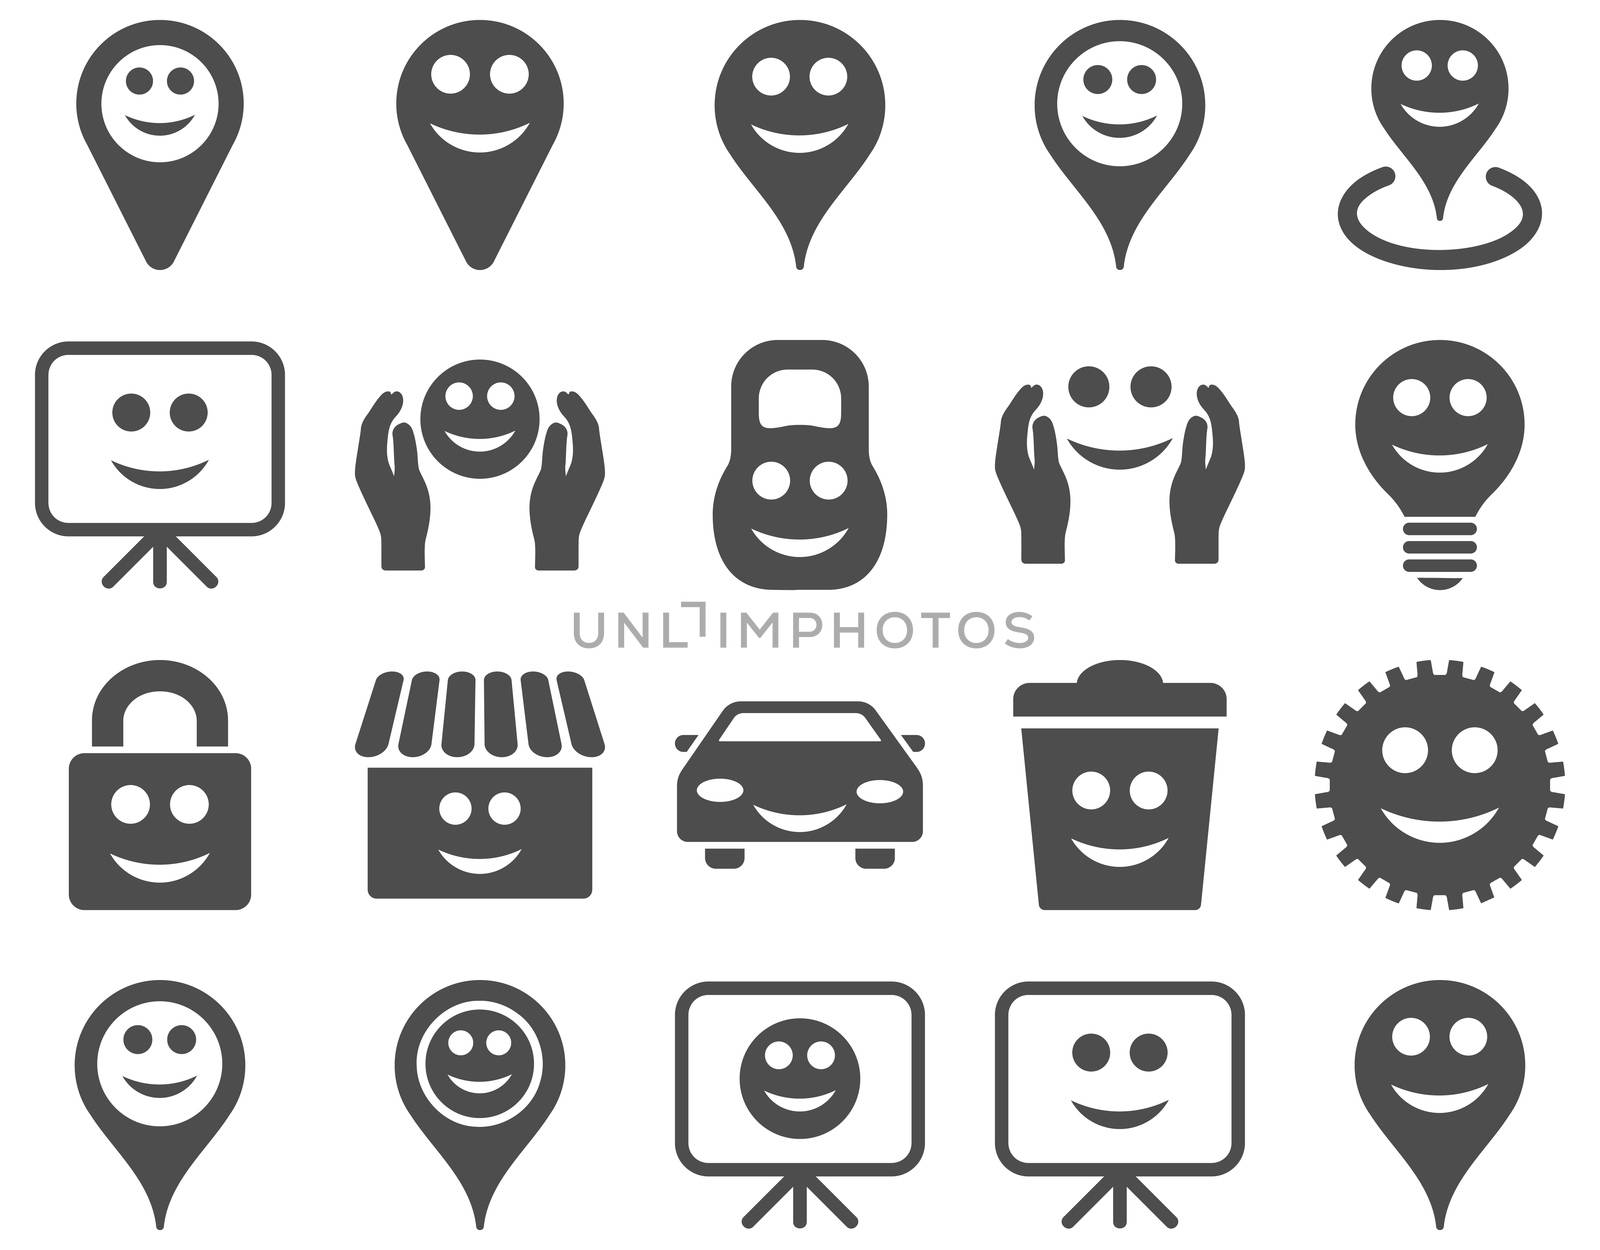 Tools, options, smiles, objects icons. Glyph set style is flat images, gray symbols, isolated on a white background.